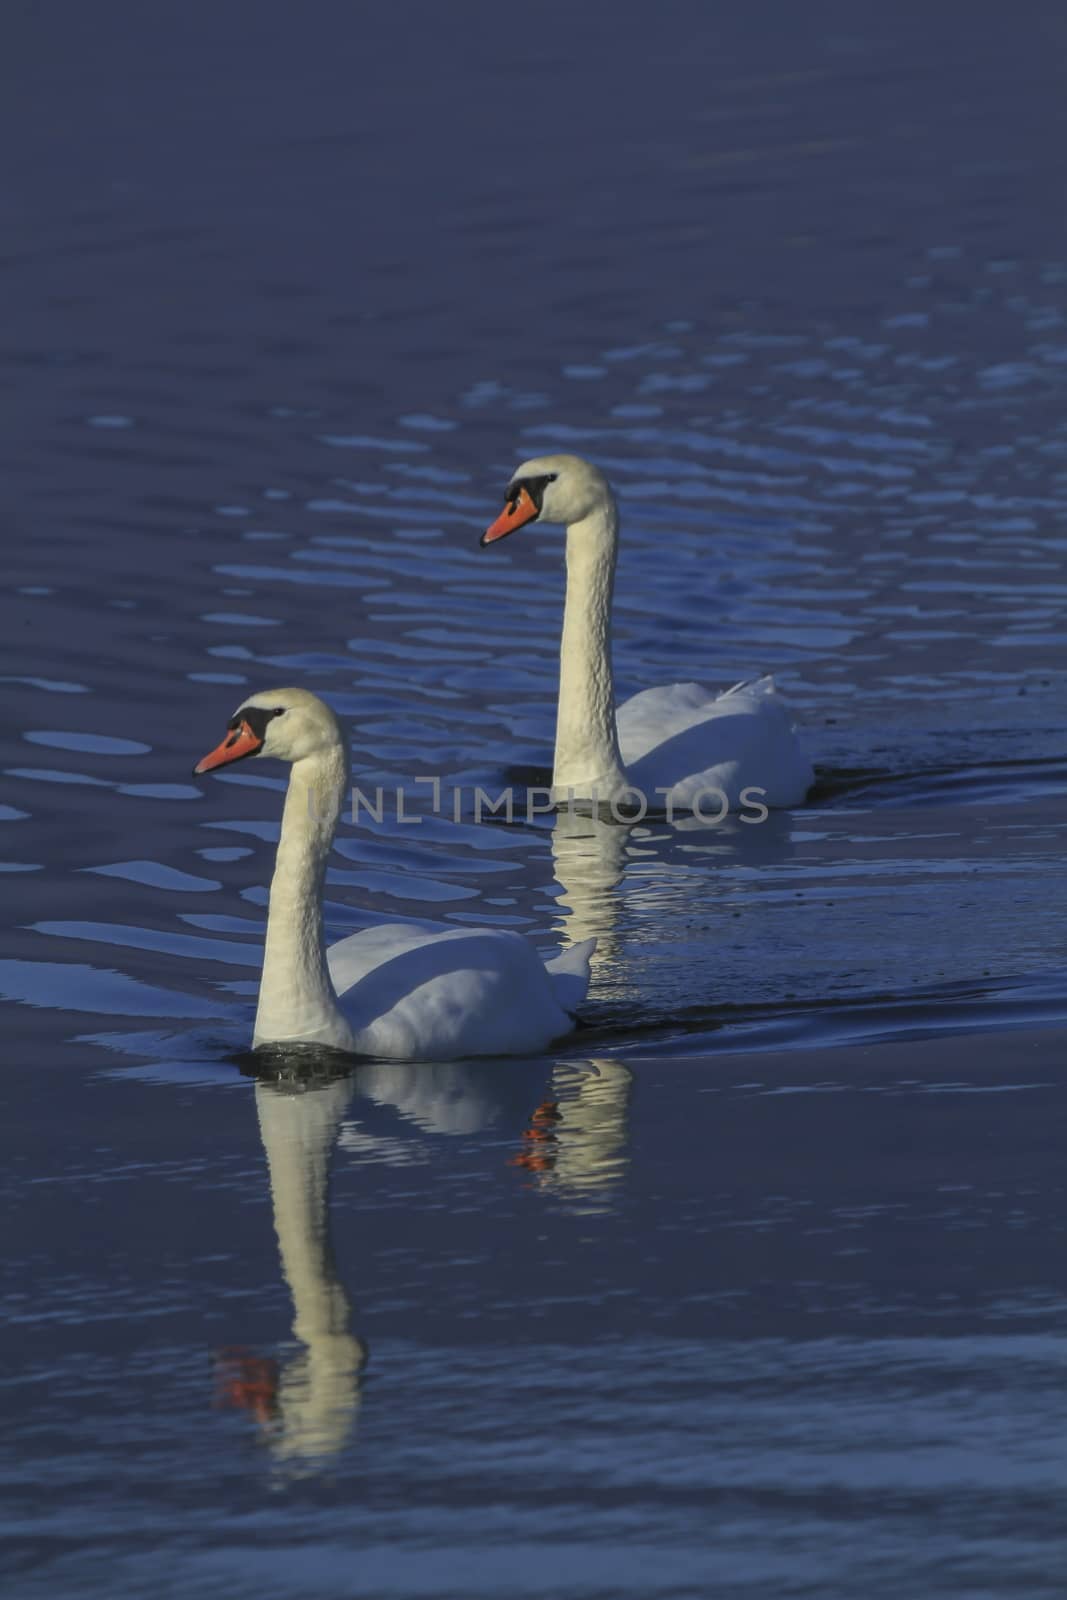 two very beautiful swans in a lake by mariephotos